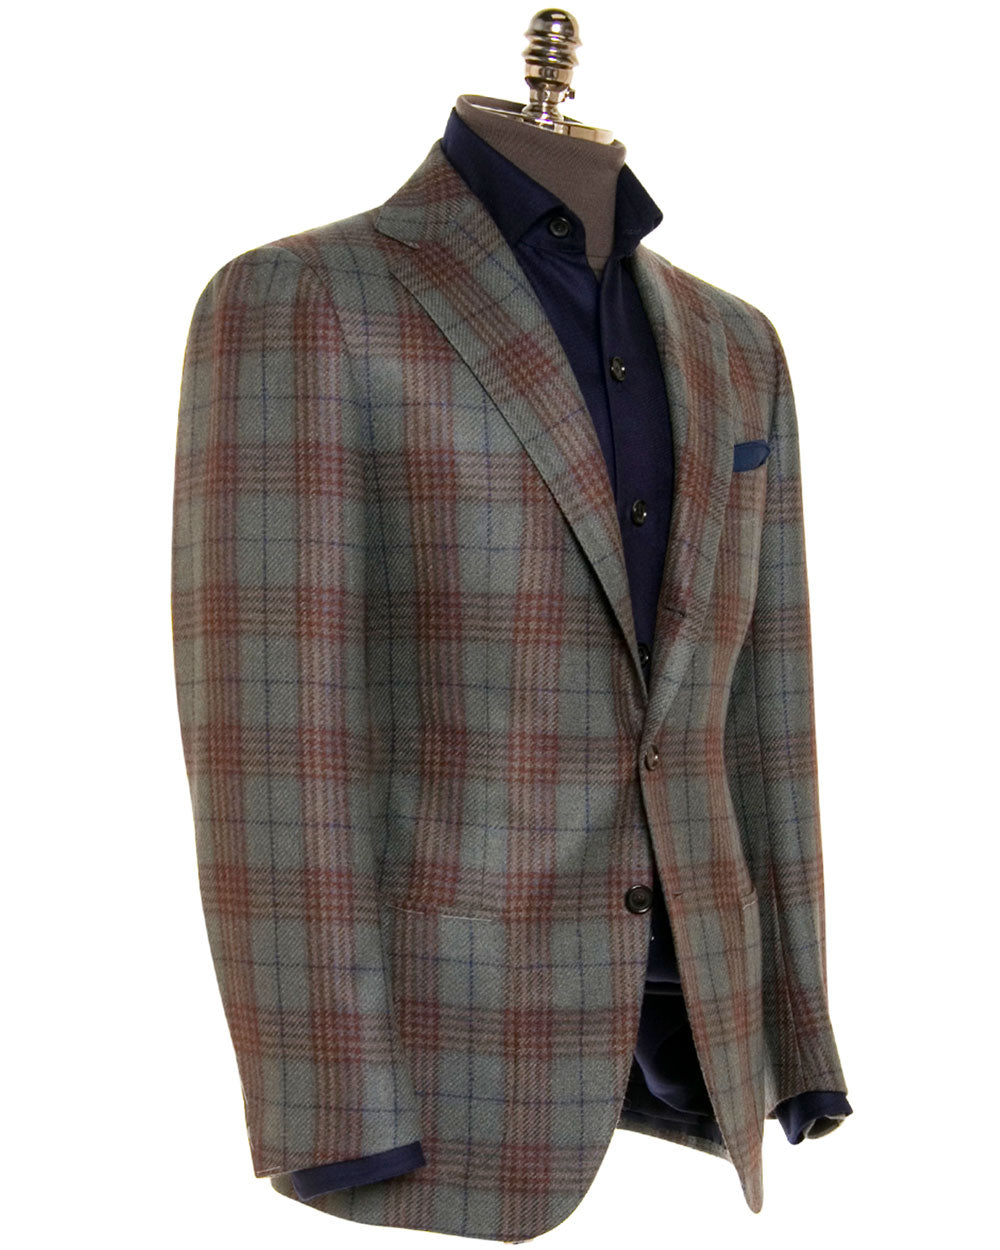 Moss Green with Rust and Blue Plaid Sportcoat